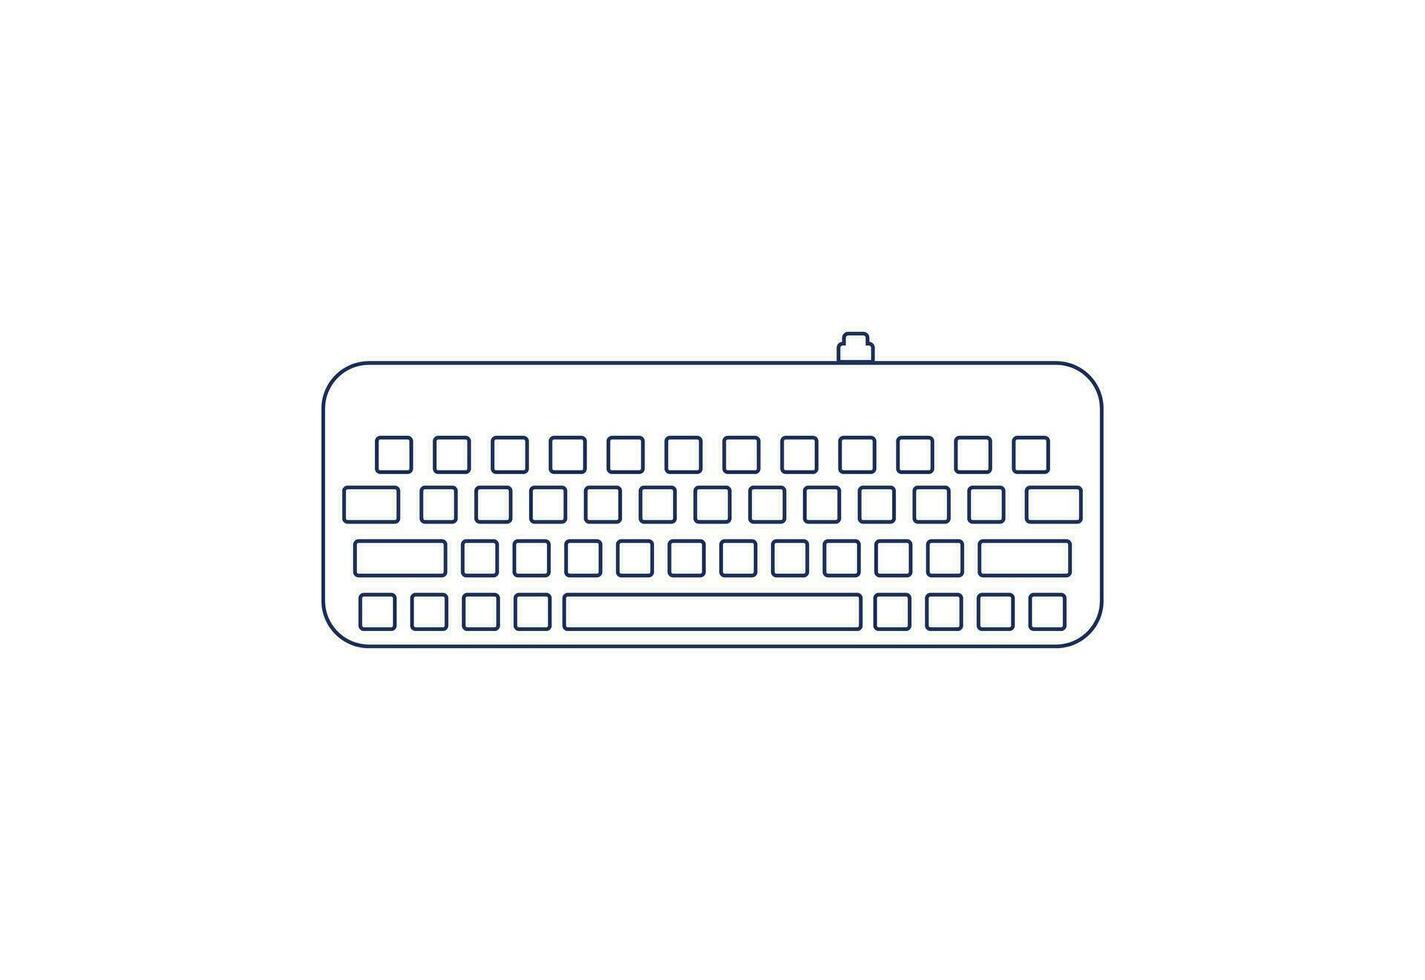 Abstract Computer keyboard logo design, vector silhouette keyboard icon, Vector illustration